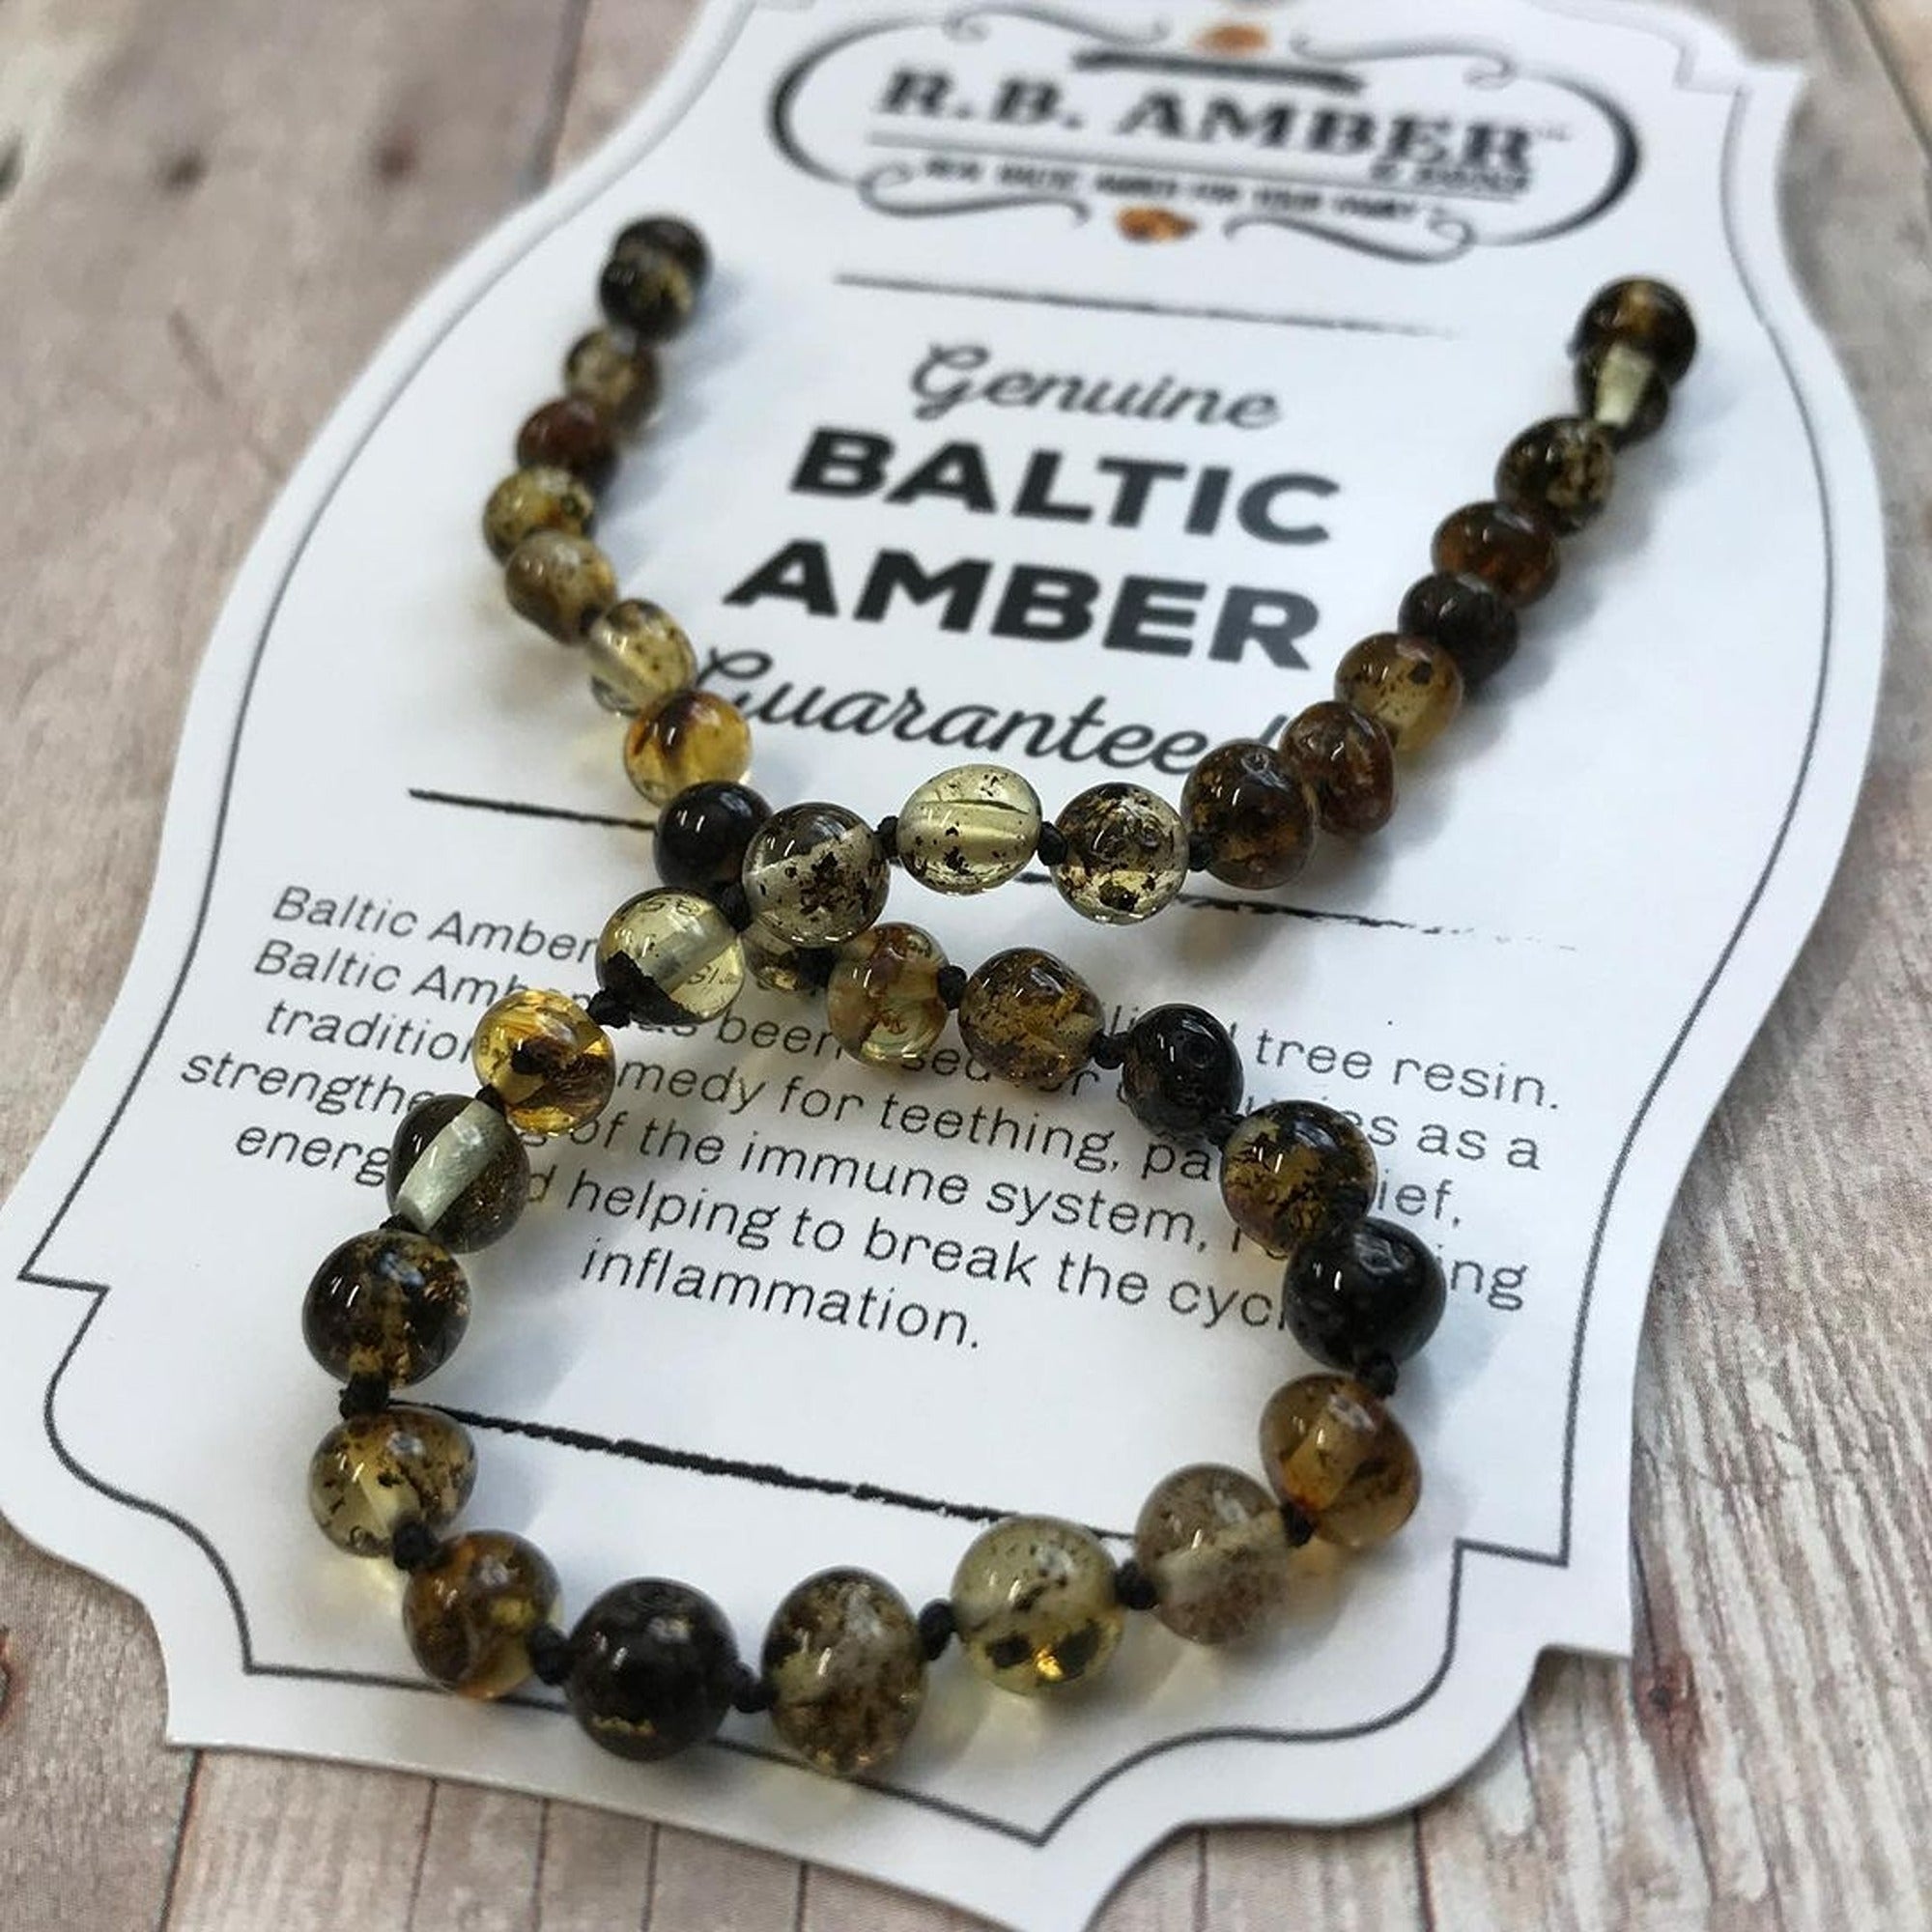 Amberalia knotted  Baltic Amber Necklace, Lab-tested, Certified  Genuine Amber - SIZES FOR EVERYBODY - Boost immune System -Ligth Green  Black thread-  M (15.7”) - Walmart.com